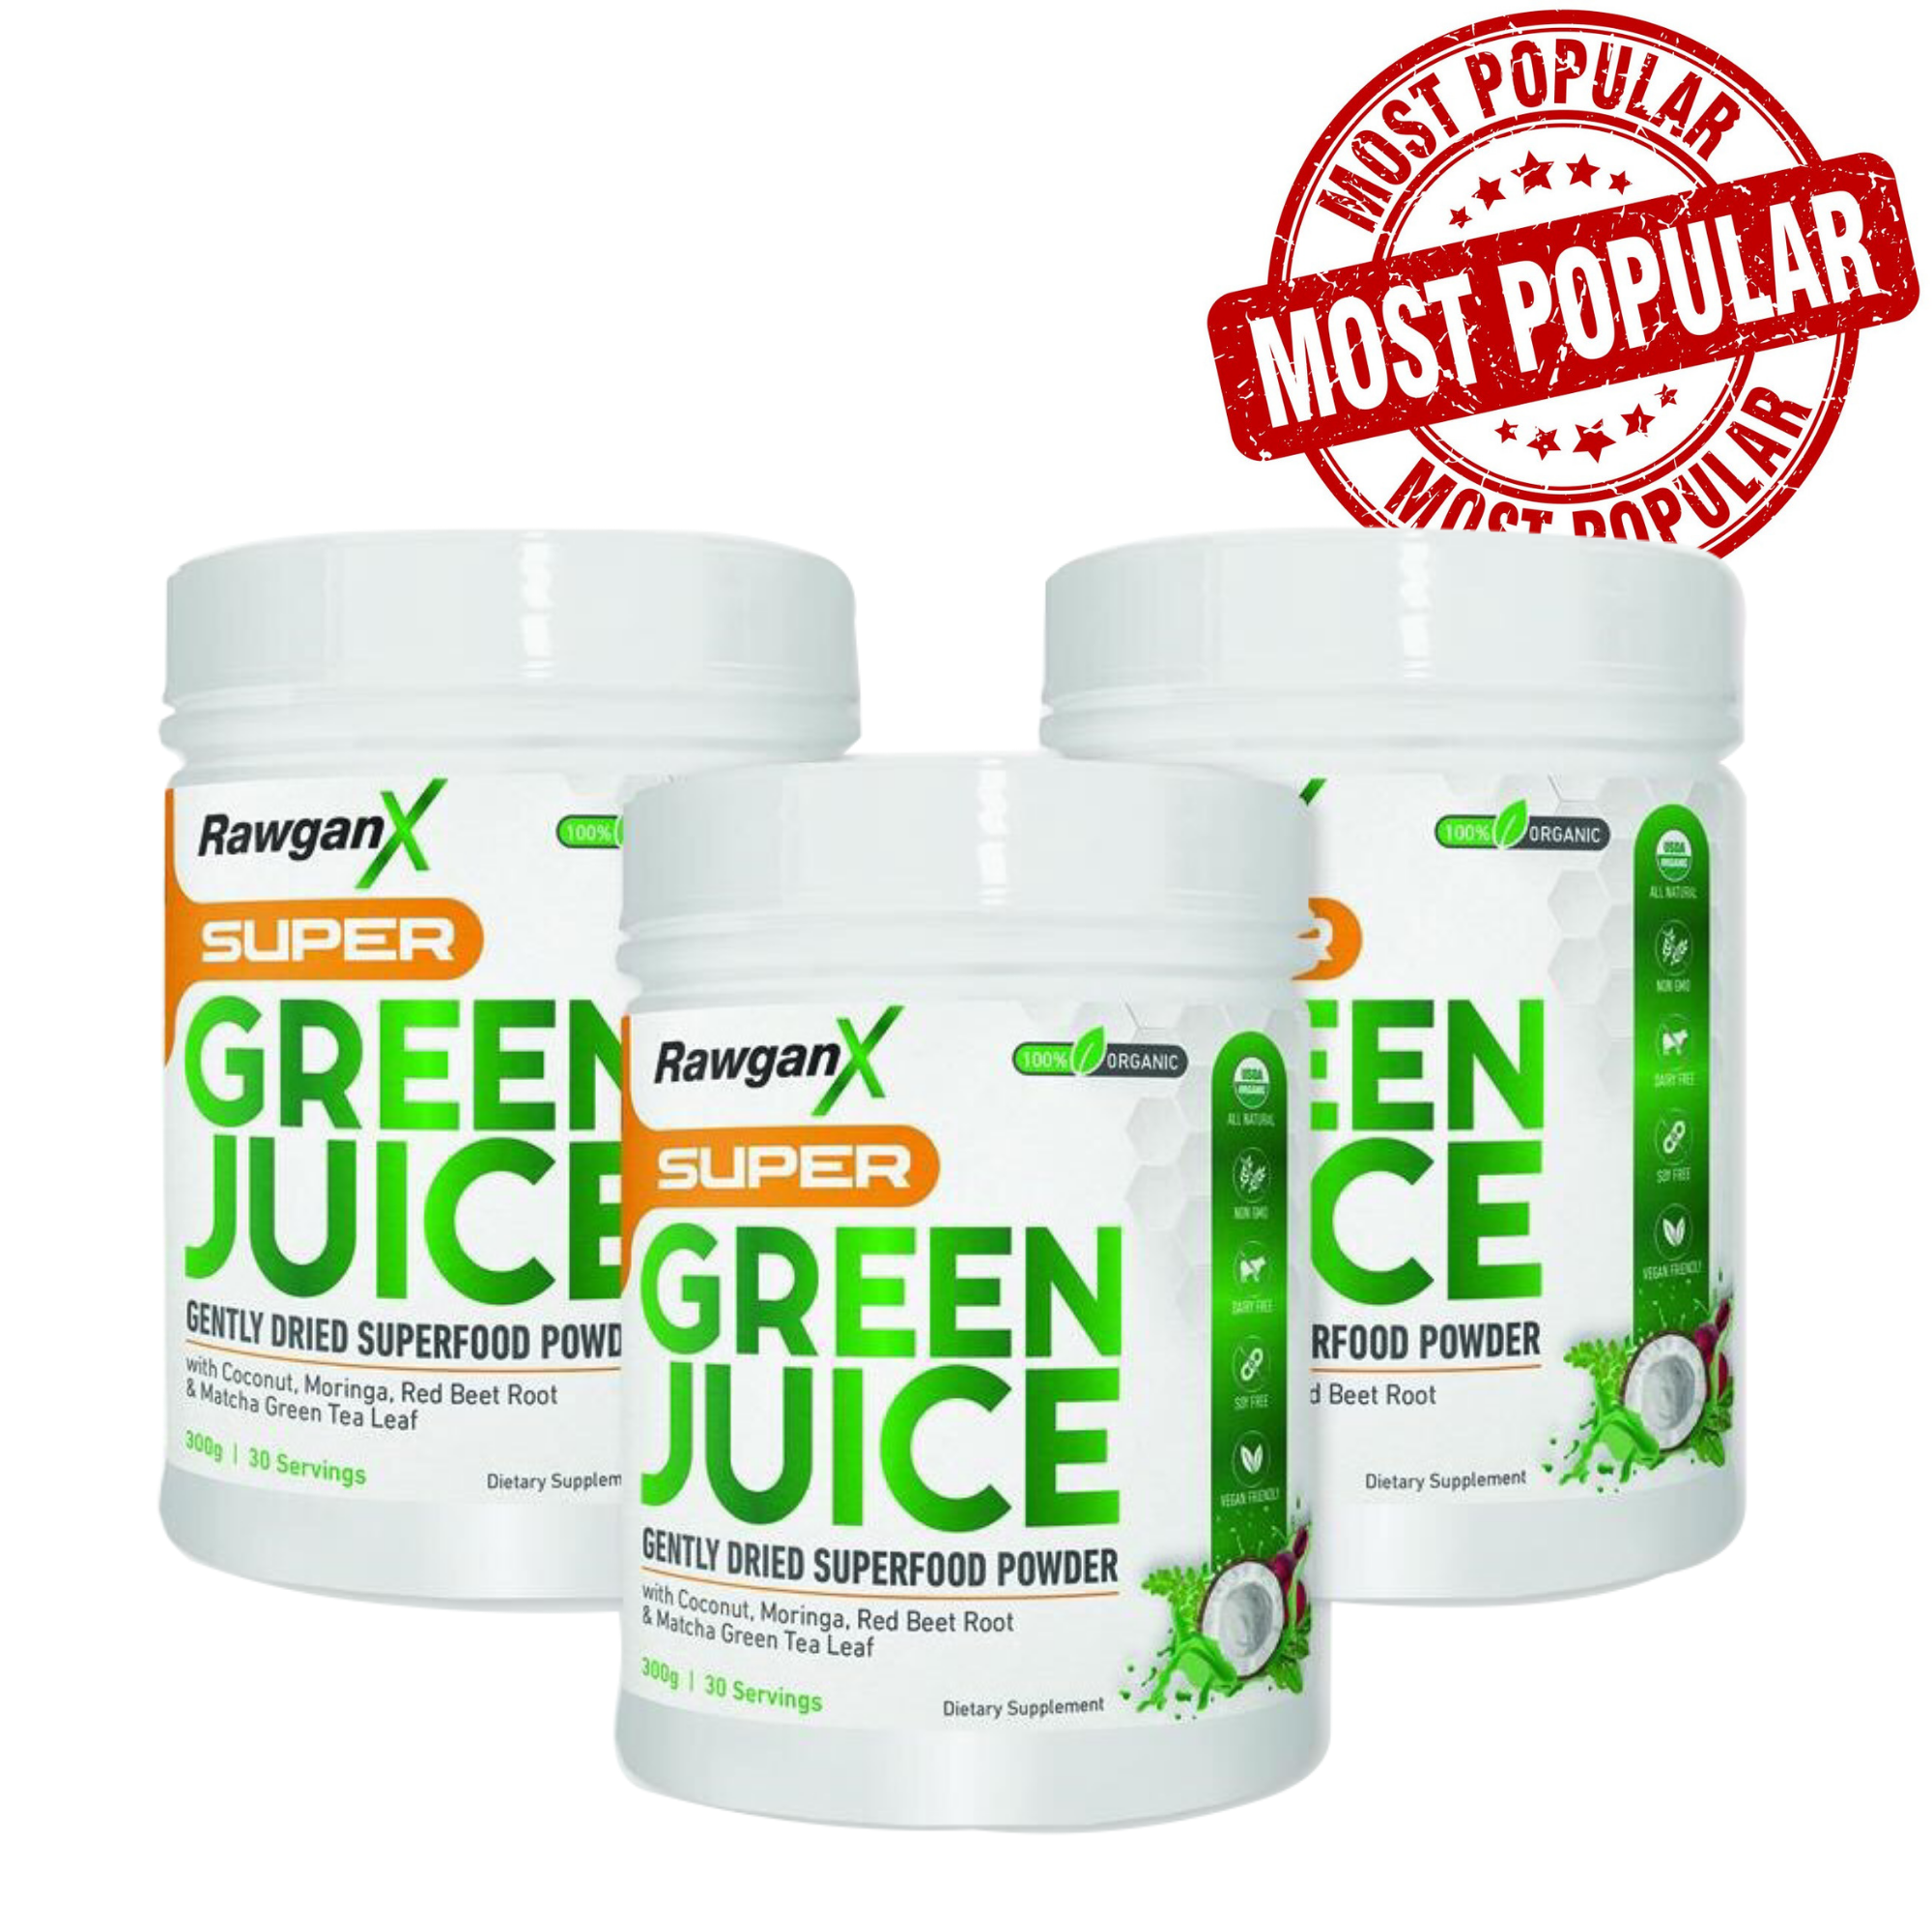 RawganX Super Green Juice- 90 Day Supply - TWO of the NEW Pineapple Mango Flavor & ONE of the Original Monk Fruit Flavor